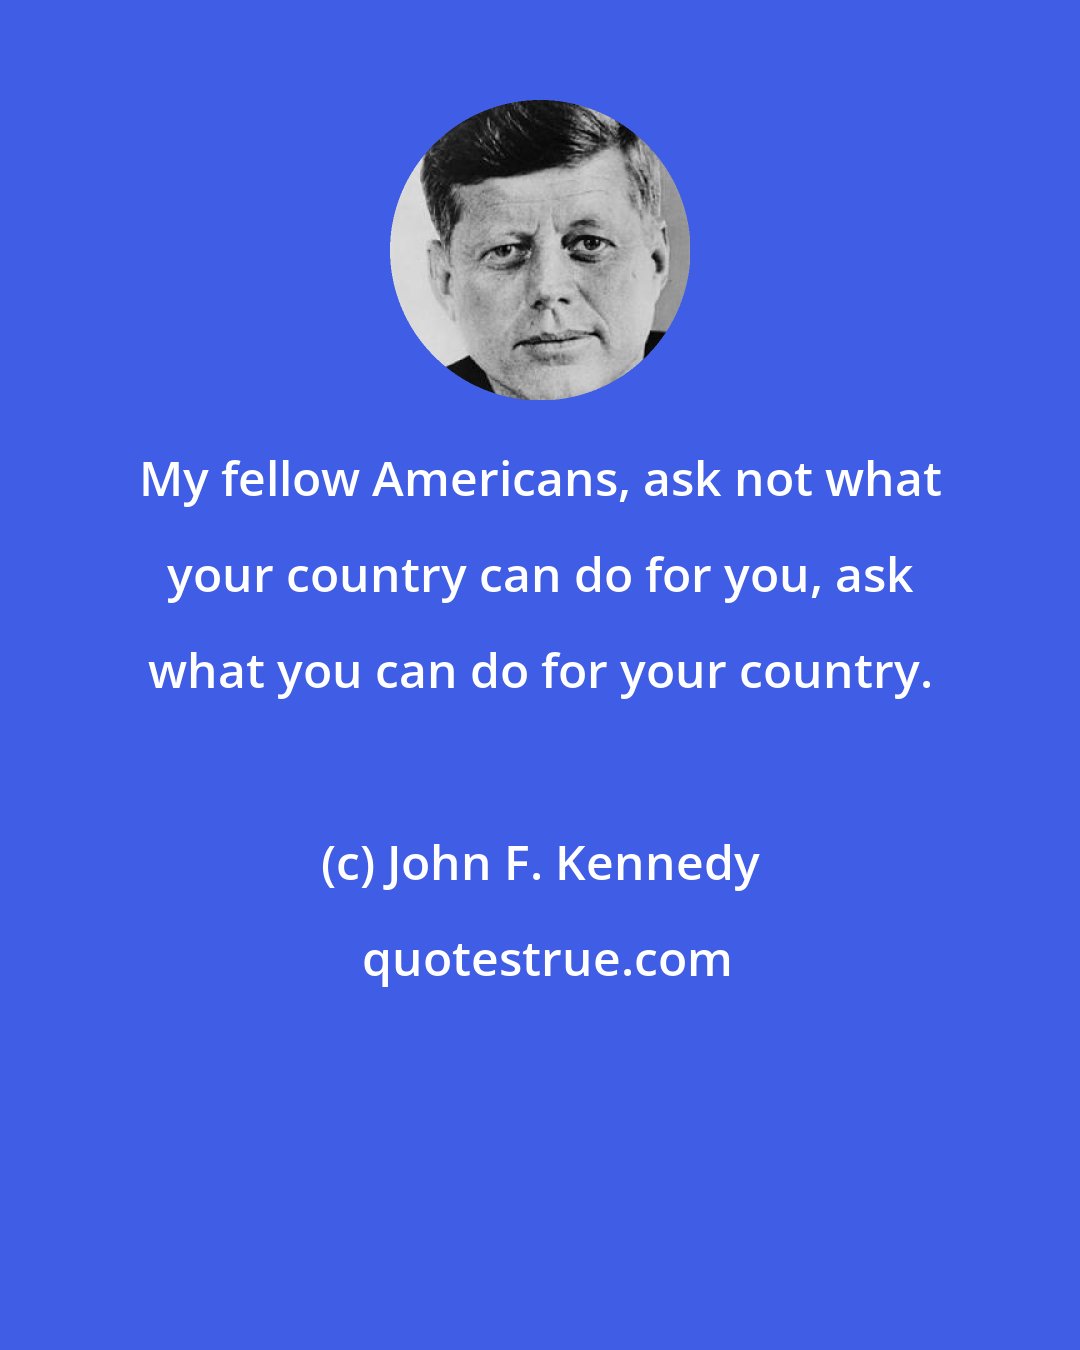 John F. Kennedy: My fellow Americans, ask not what your country can do for you, ask what you can do for your country.